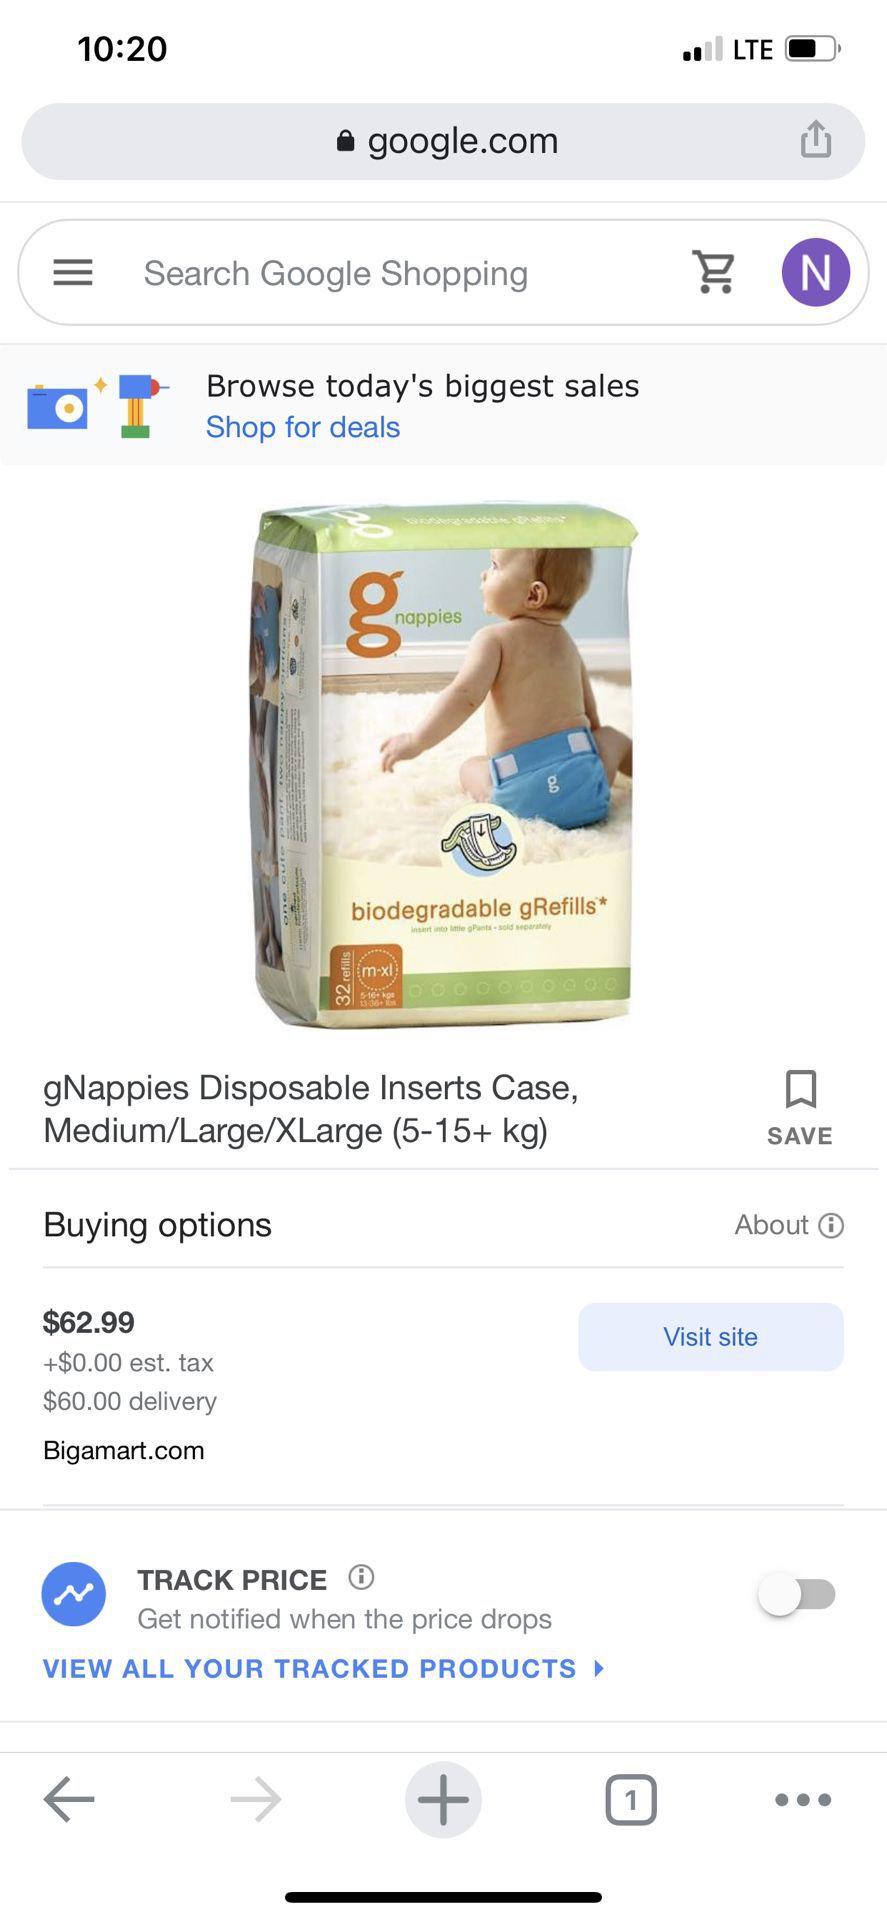 Gdiapers Disposable Inserts